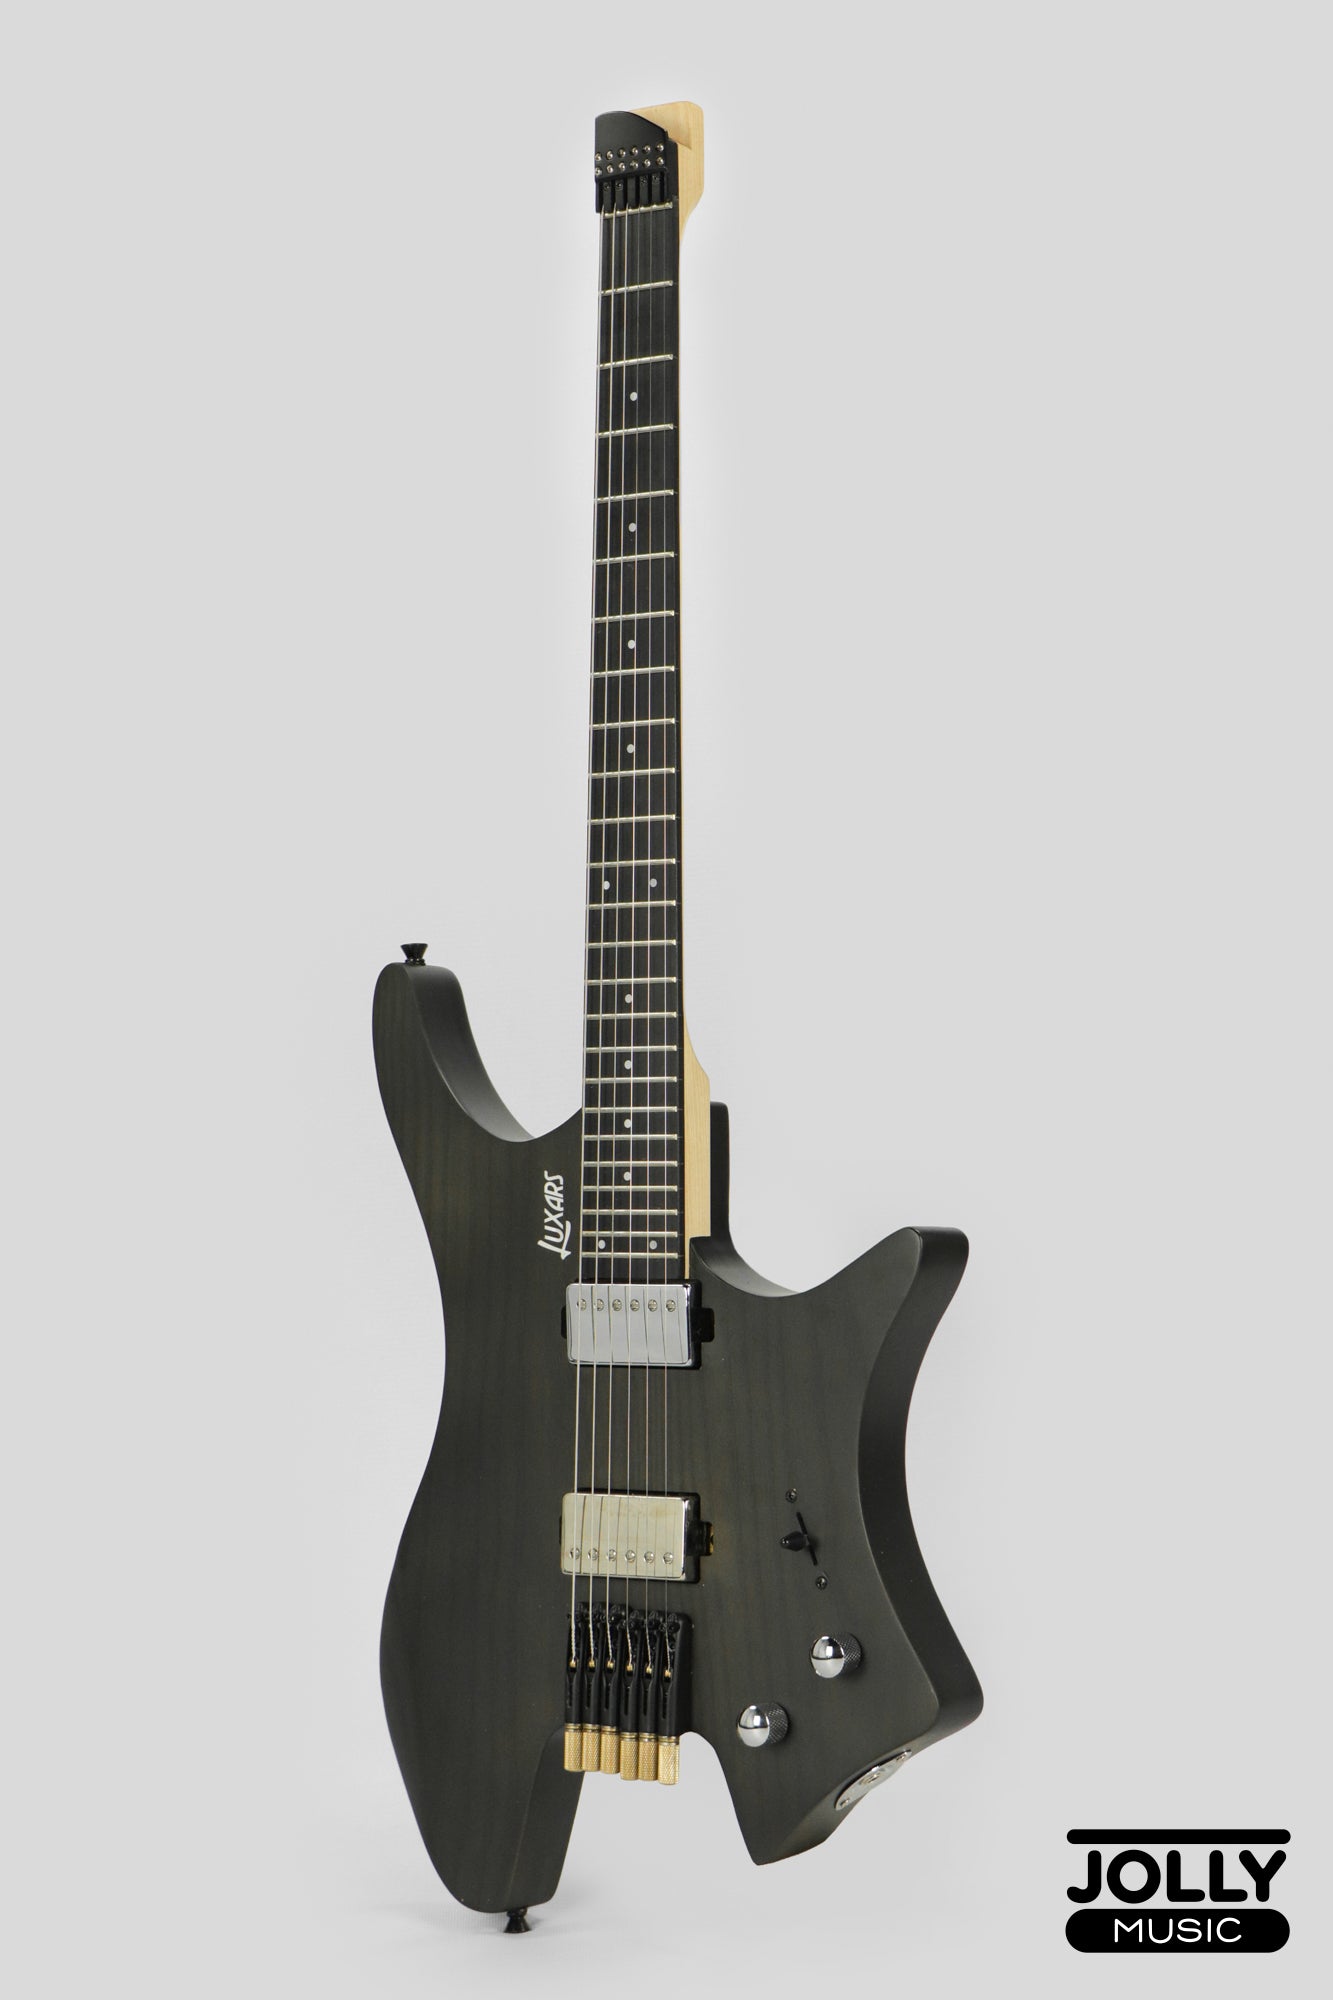 Luxars S-G62 Headless Electric Guitar Basswood Body Rosewood Fretboard - Black